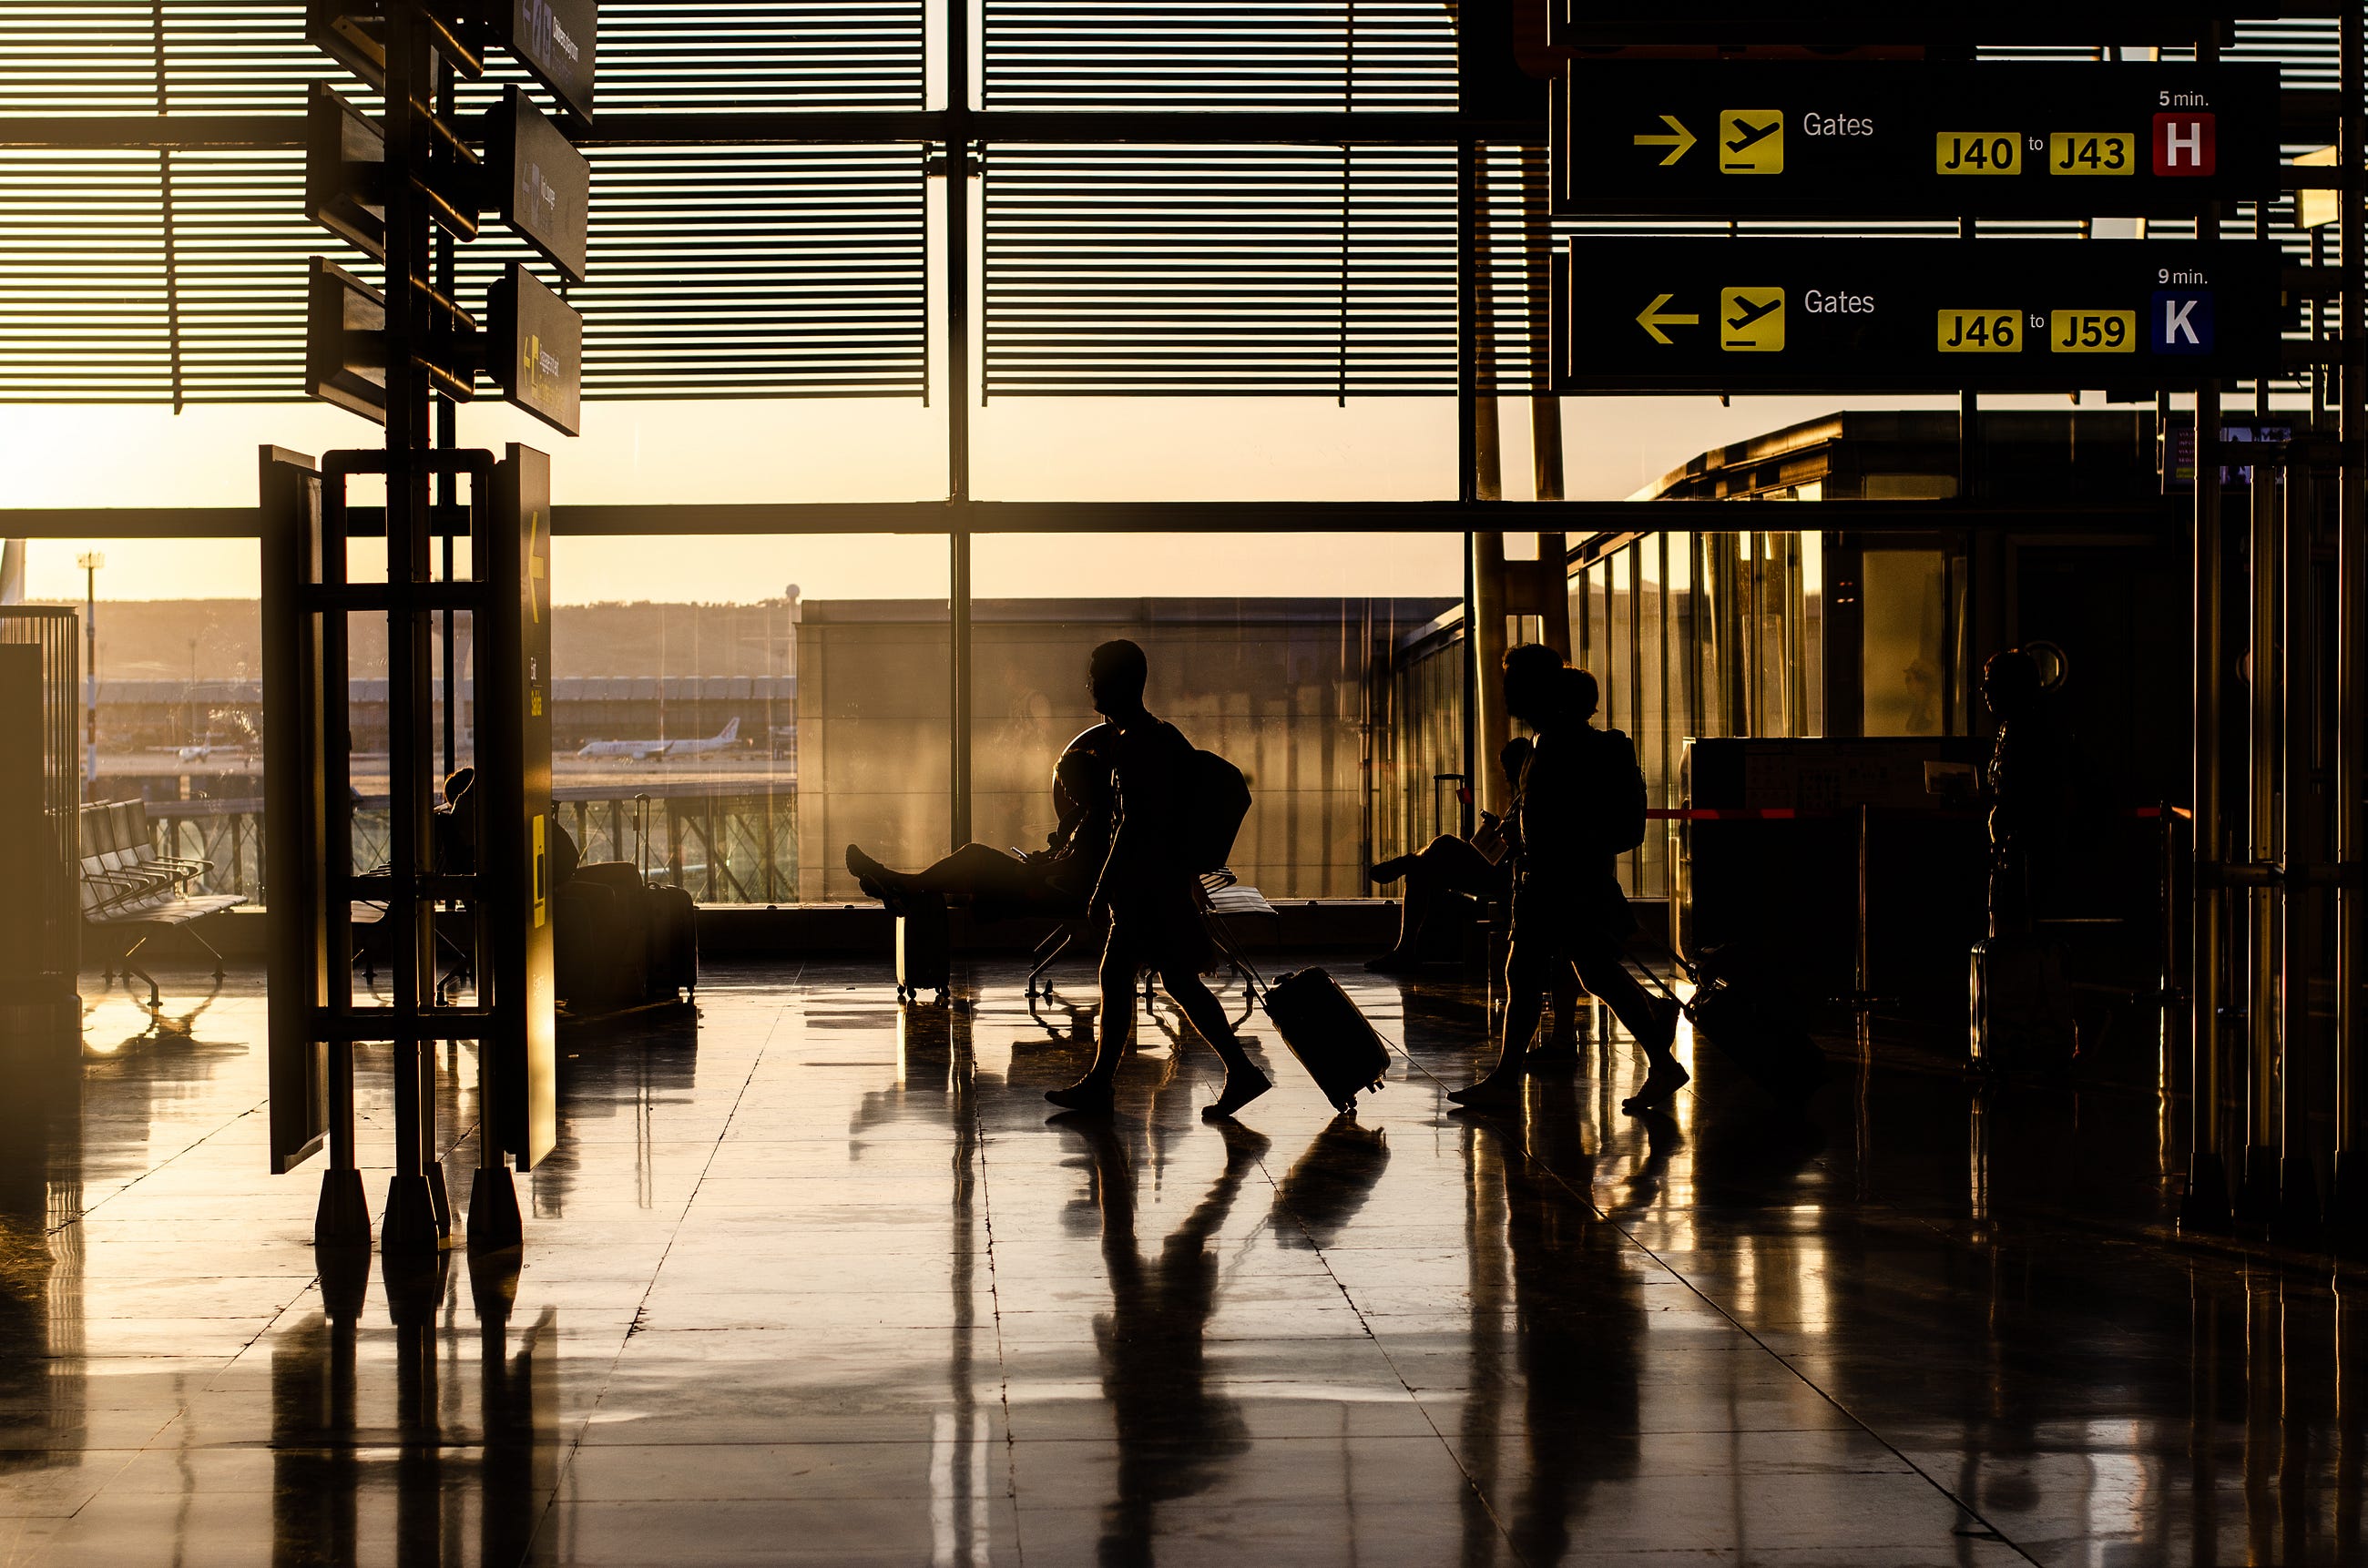 From Bored to Boarding: A Personal Odyssey of an Airport Information O